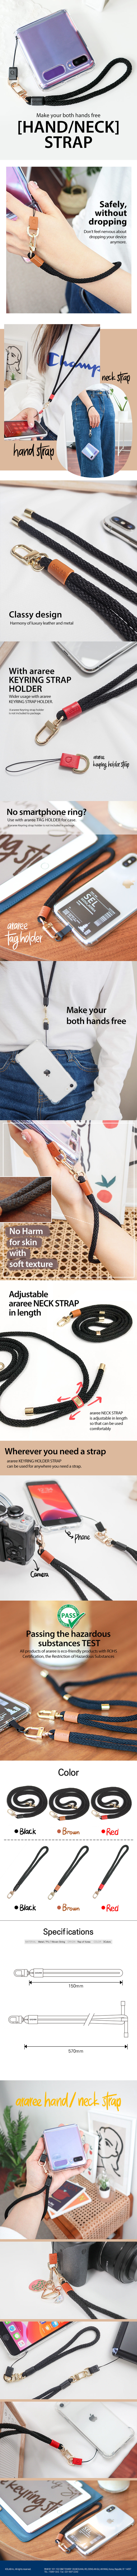 copy-1591584475-HAND_NECK_STRAP_contents_eng_860.jpg